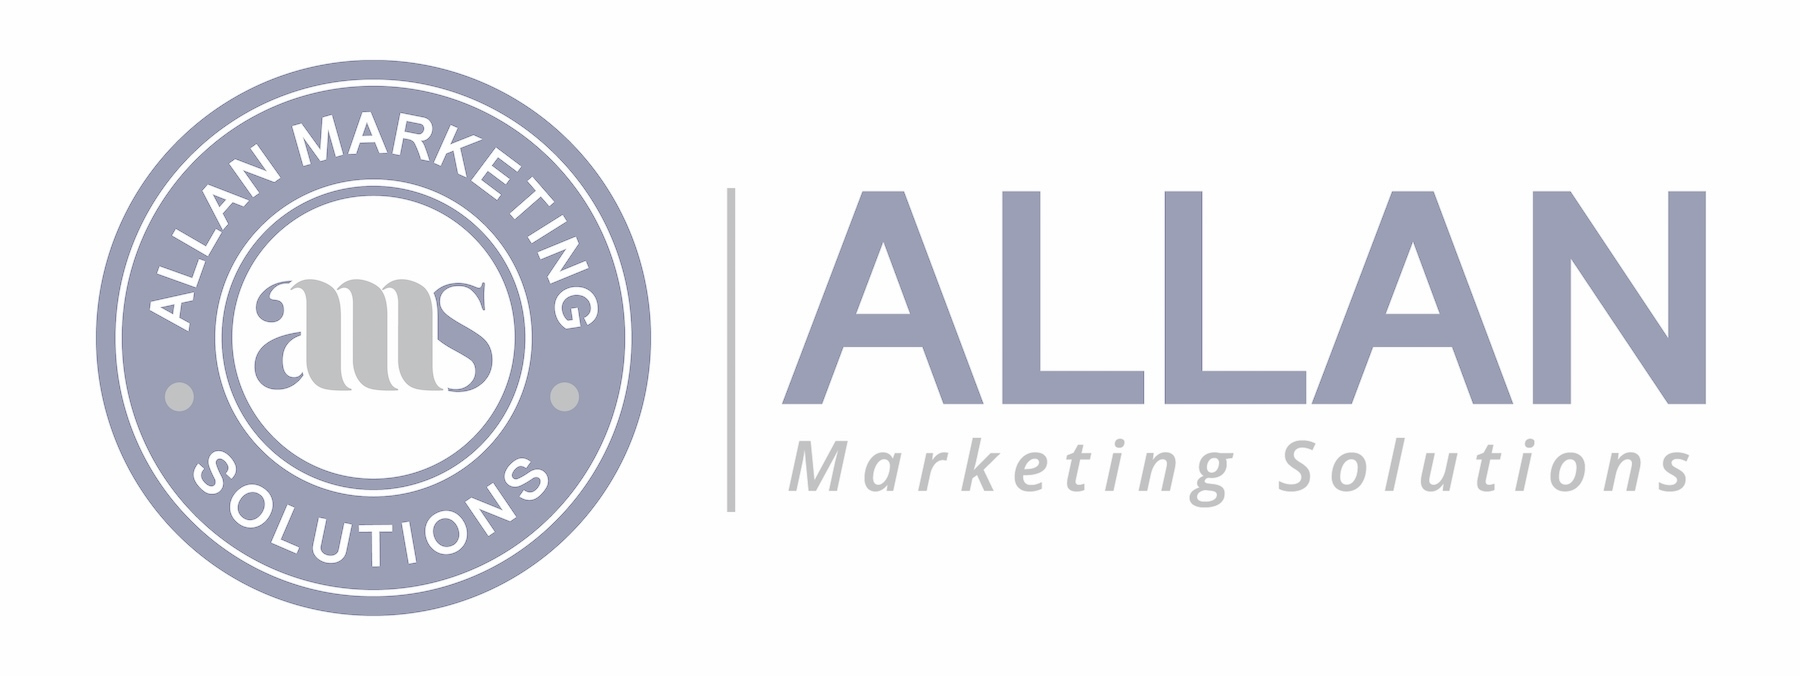 the logo for allan marketing solutions is blue and white .